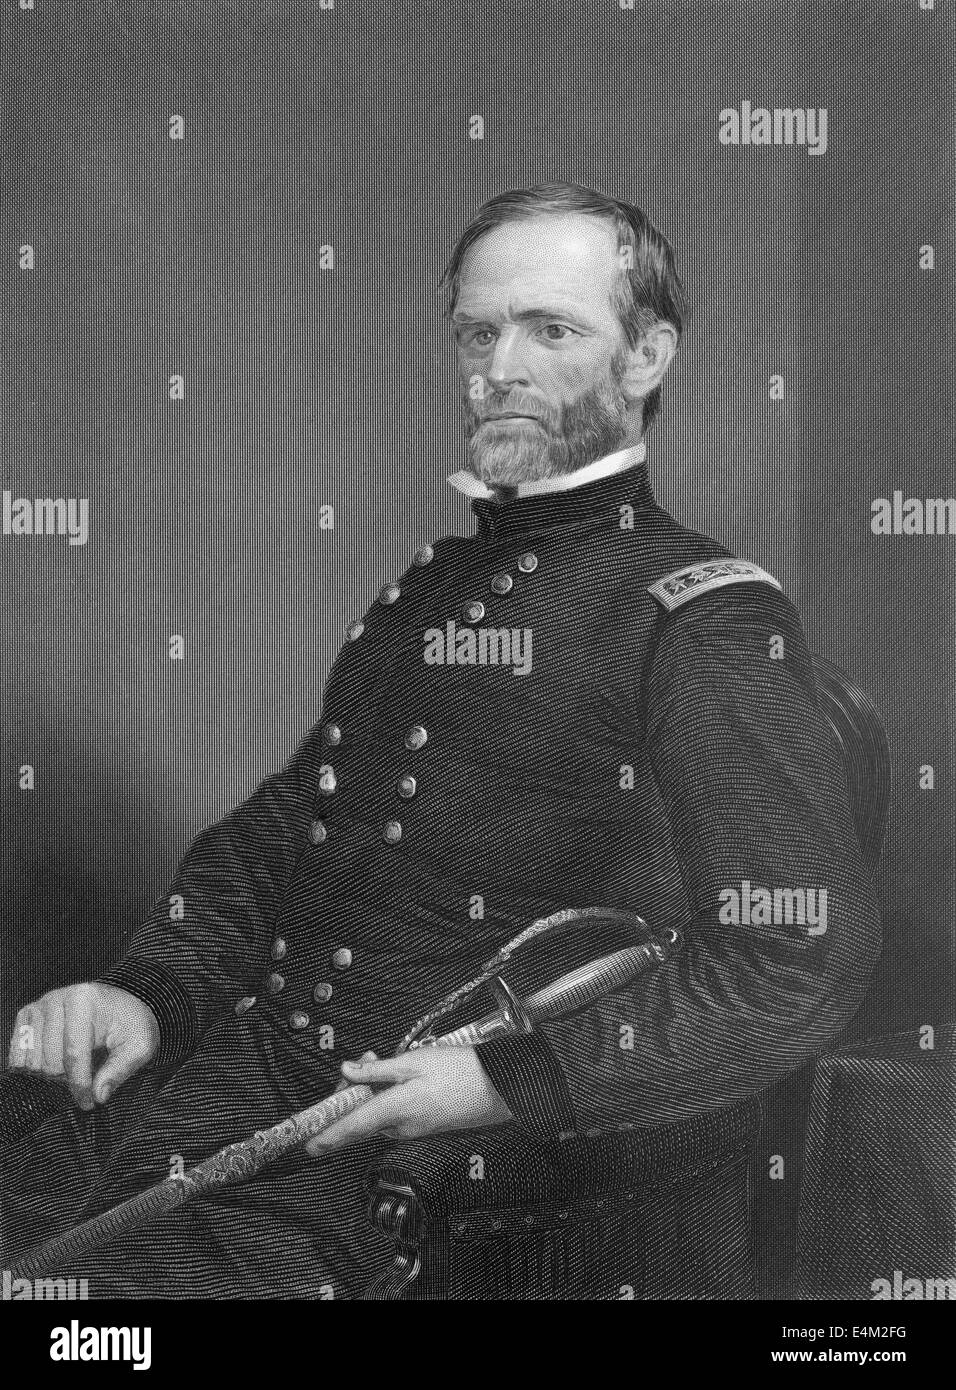 William Tecumseh Sherman, 1820 - 1891, an American General in the Union Army during the American Civil War, businessman, Stock Photo